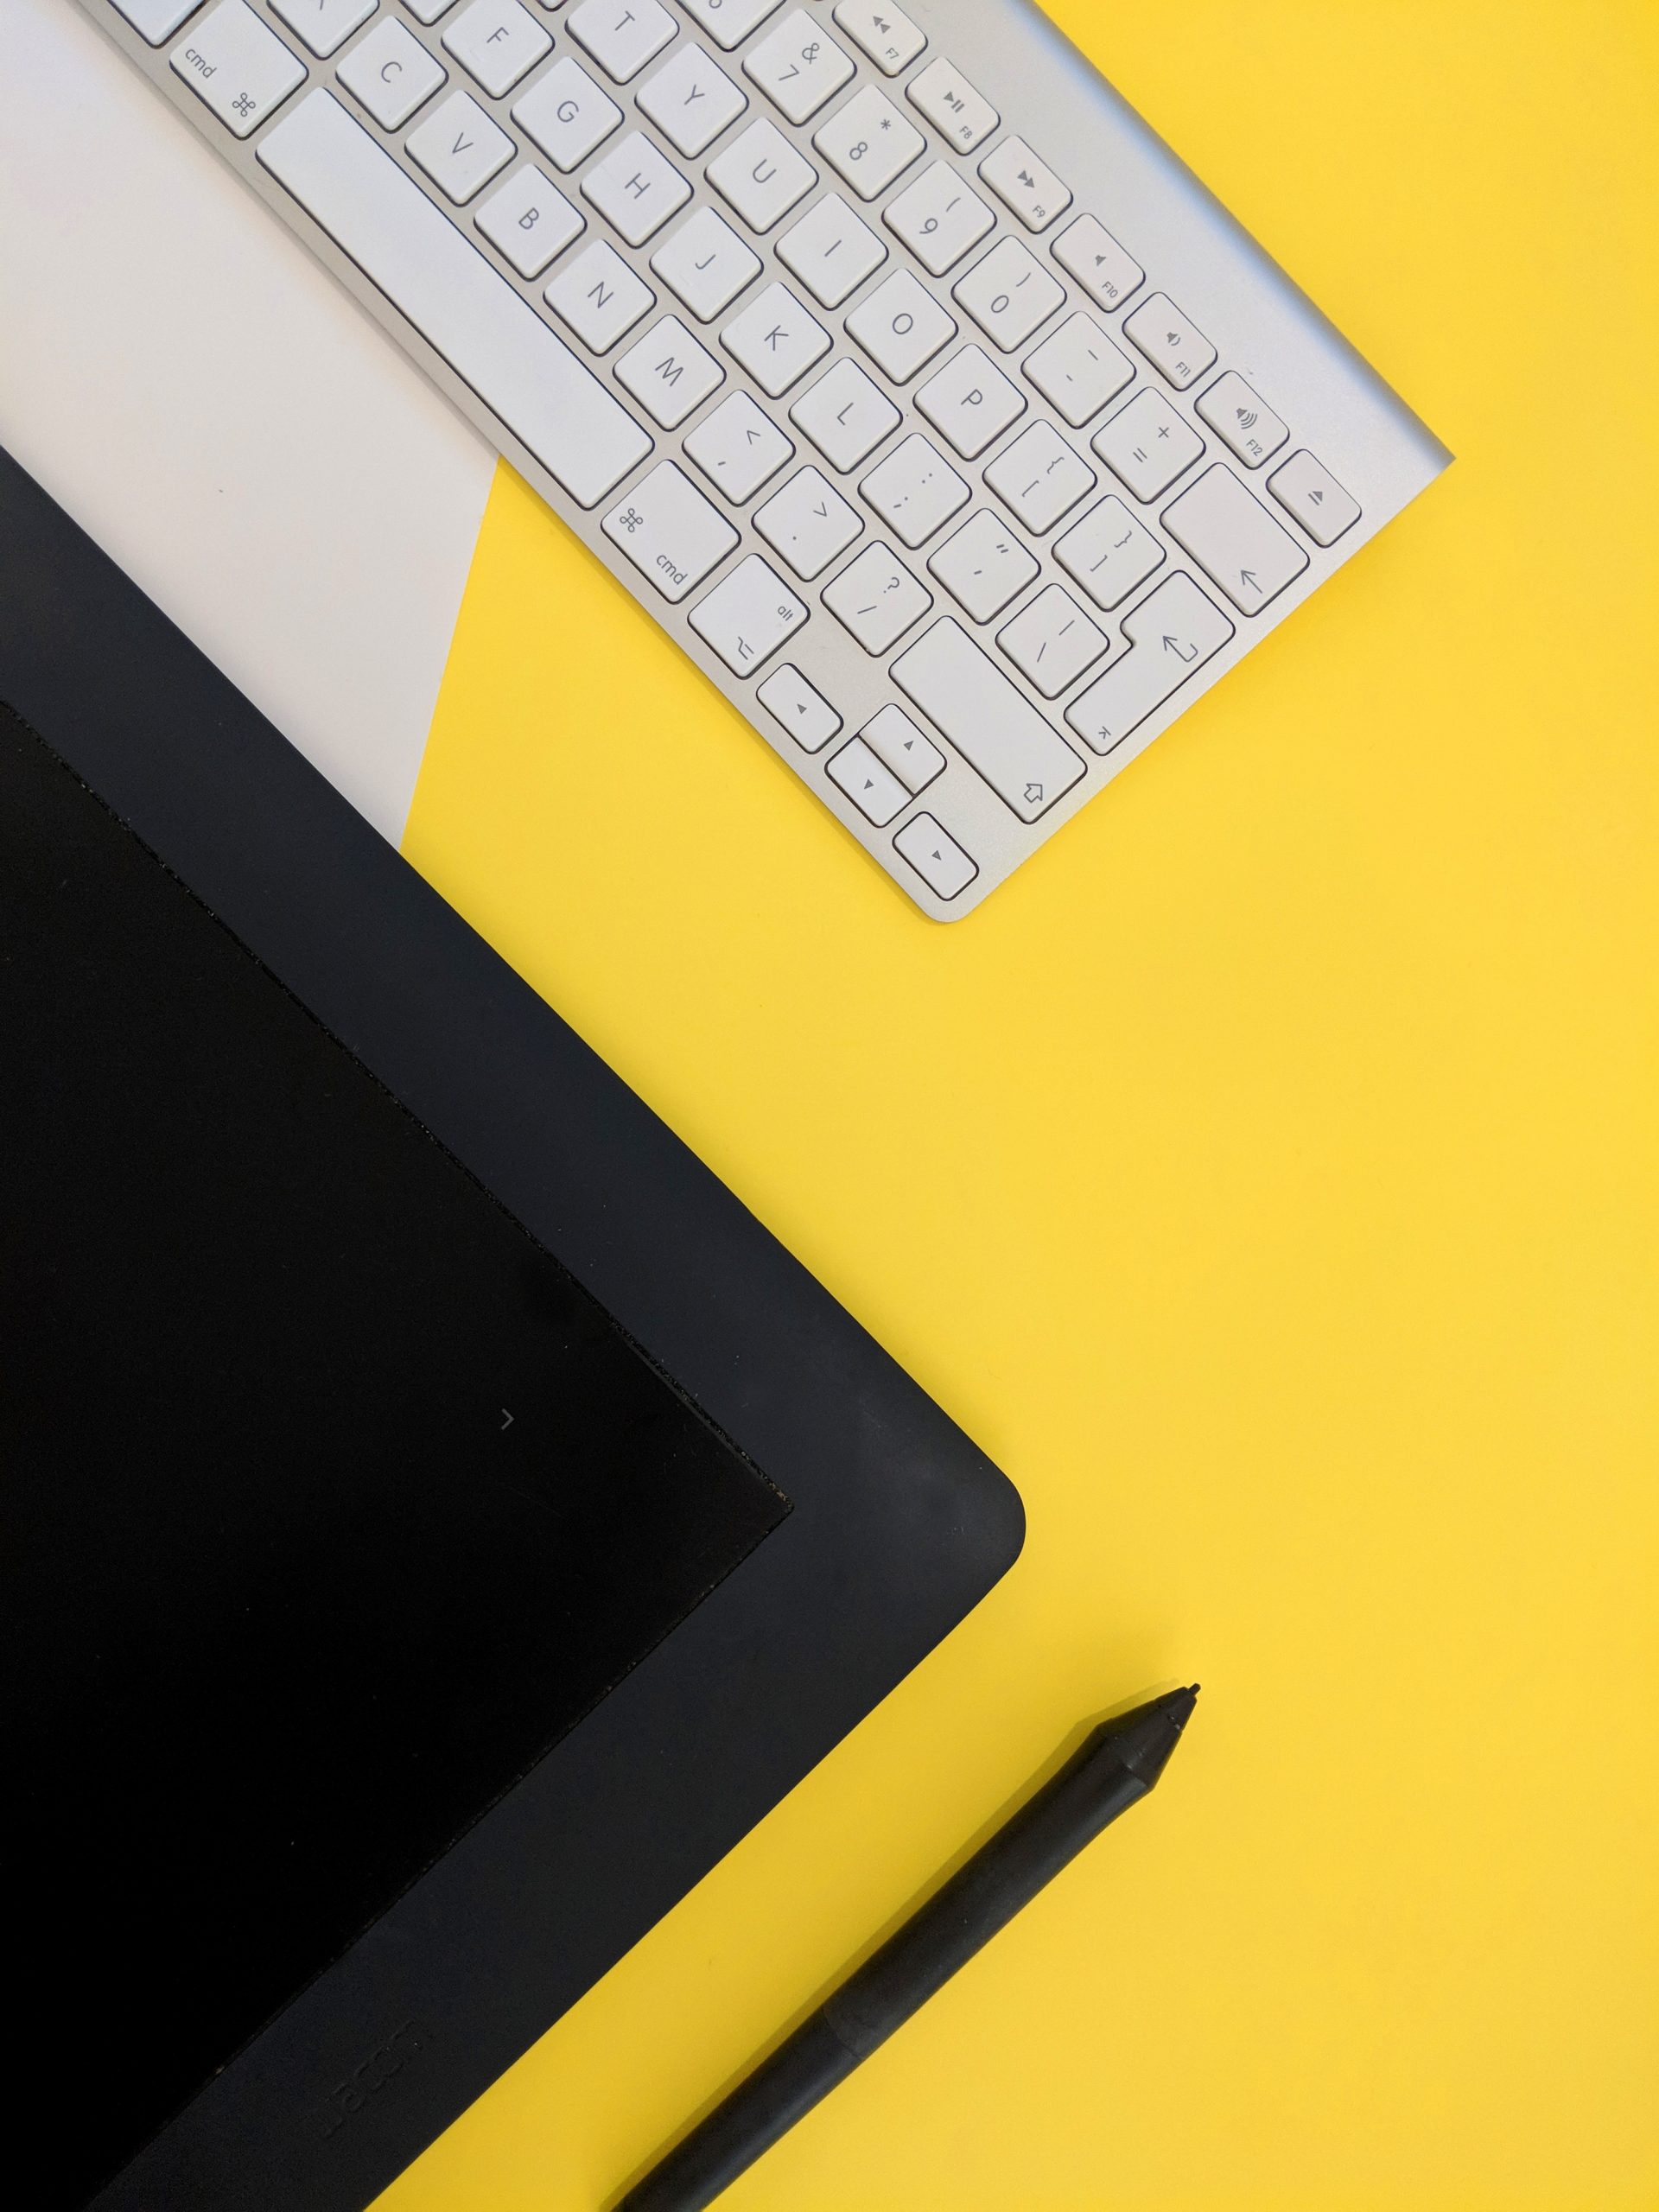 A photo of a silver Mac keyboard and a black tablet and stylus against a bright yellow and white background